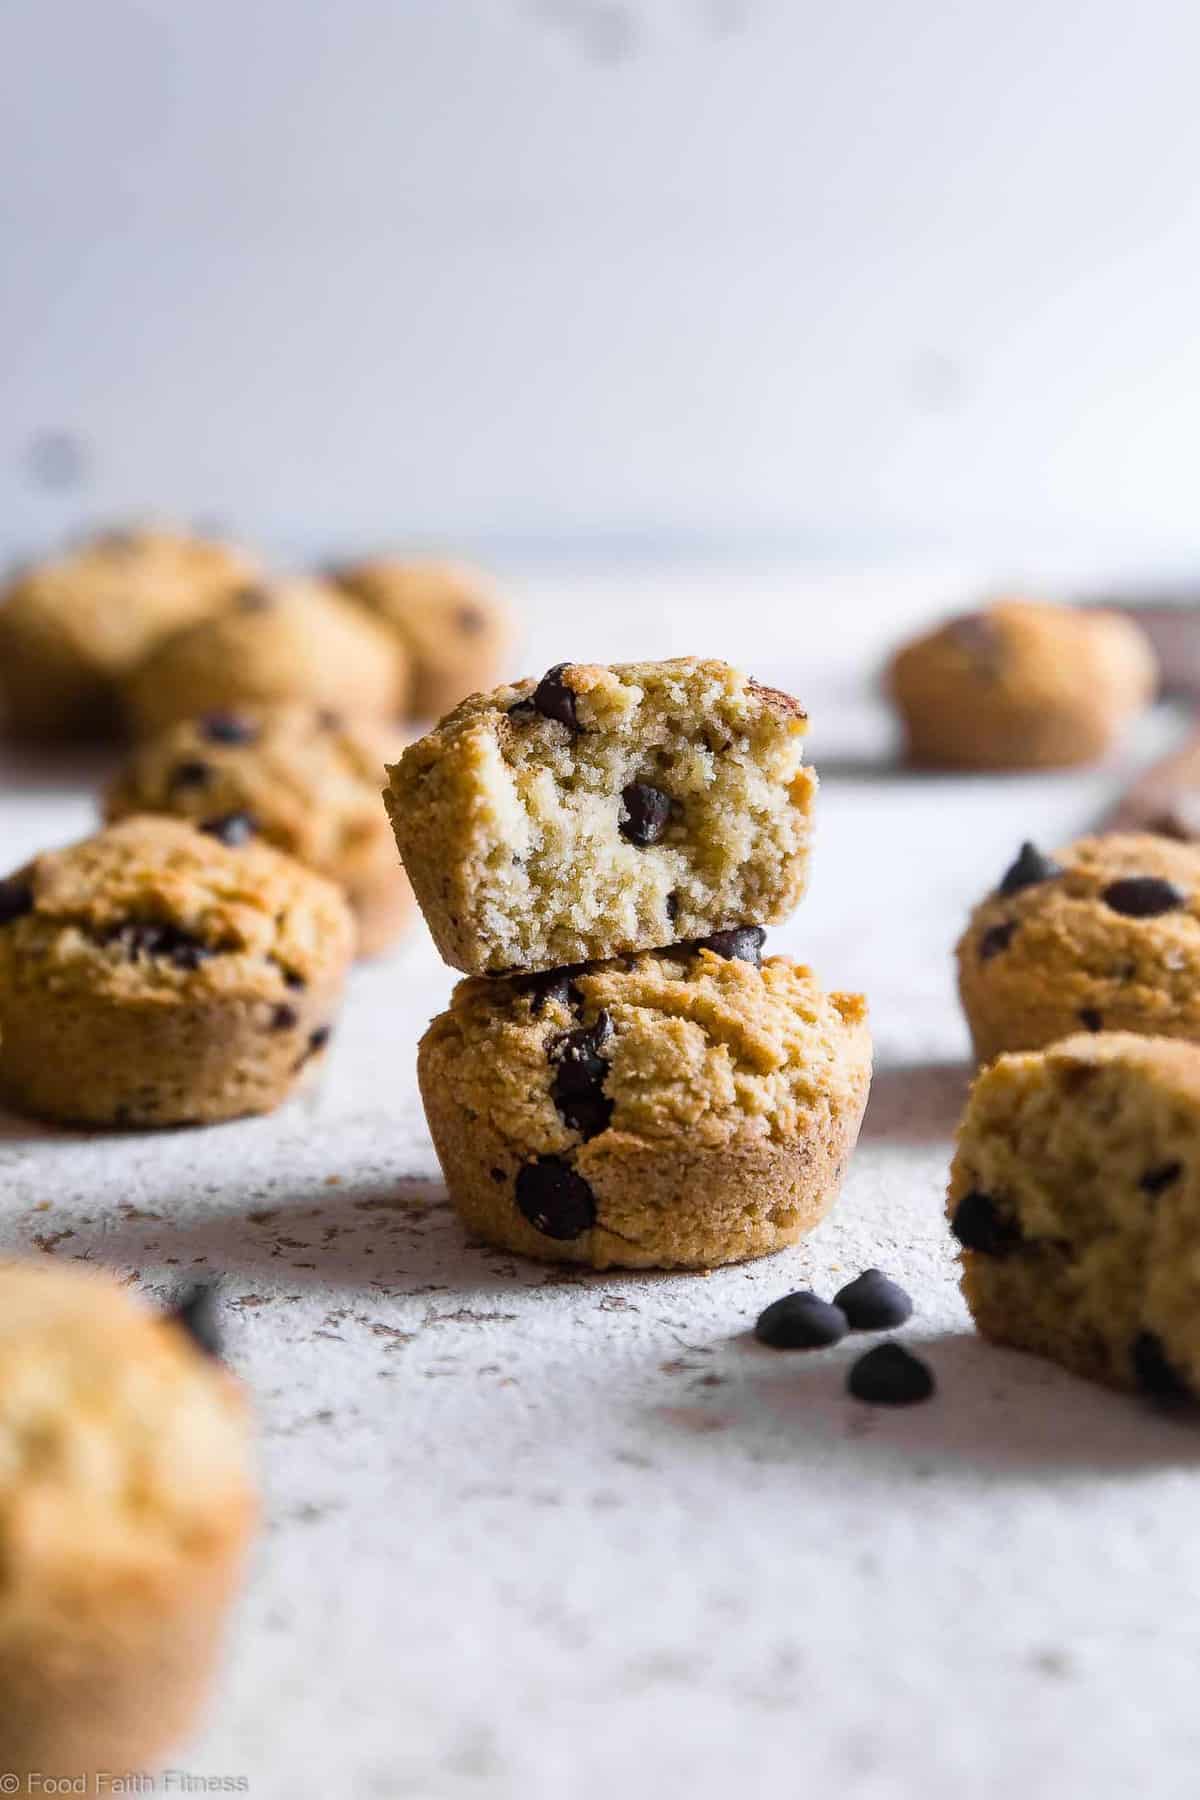 Walnut Chocolate Chip Keto Muffins - These healthy, sugar free muffins are loaded with chocolate chips and black walnuts and are SO moist and fluffy you won't believe they're gluten free, keto AND paleo! | #Foodfaithfitness | 